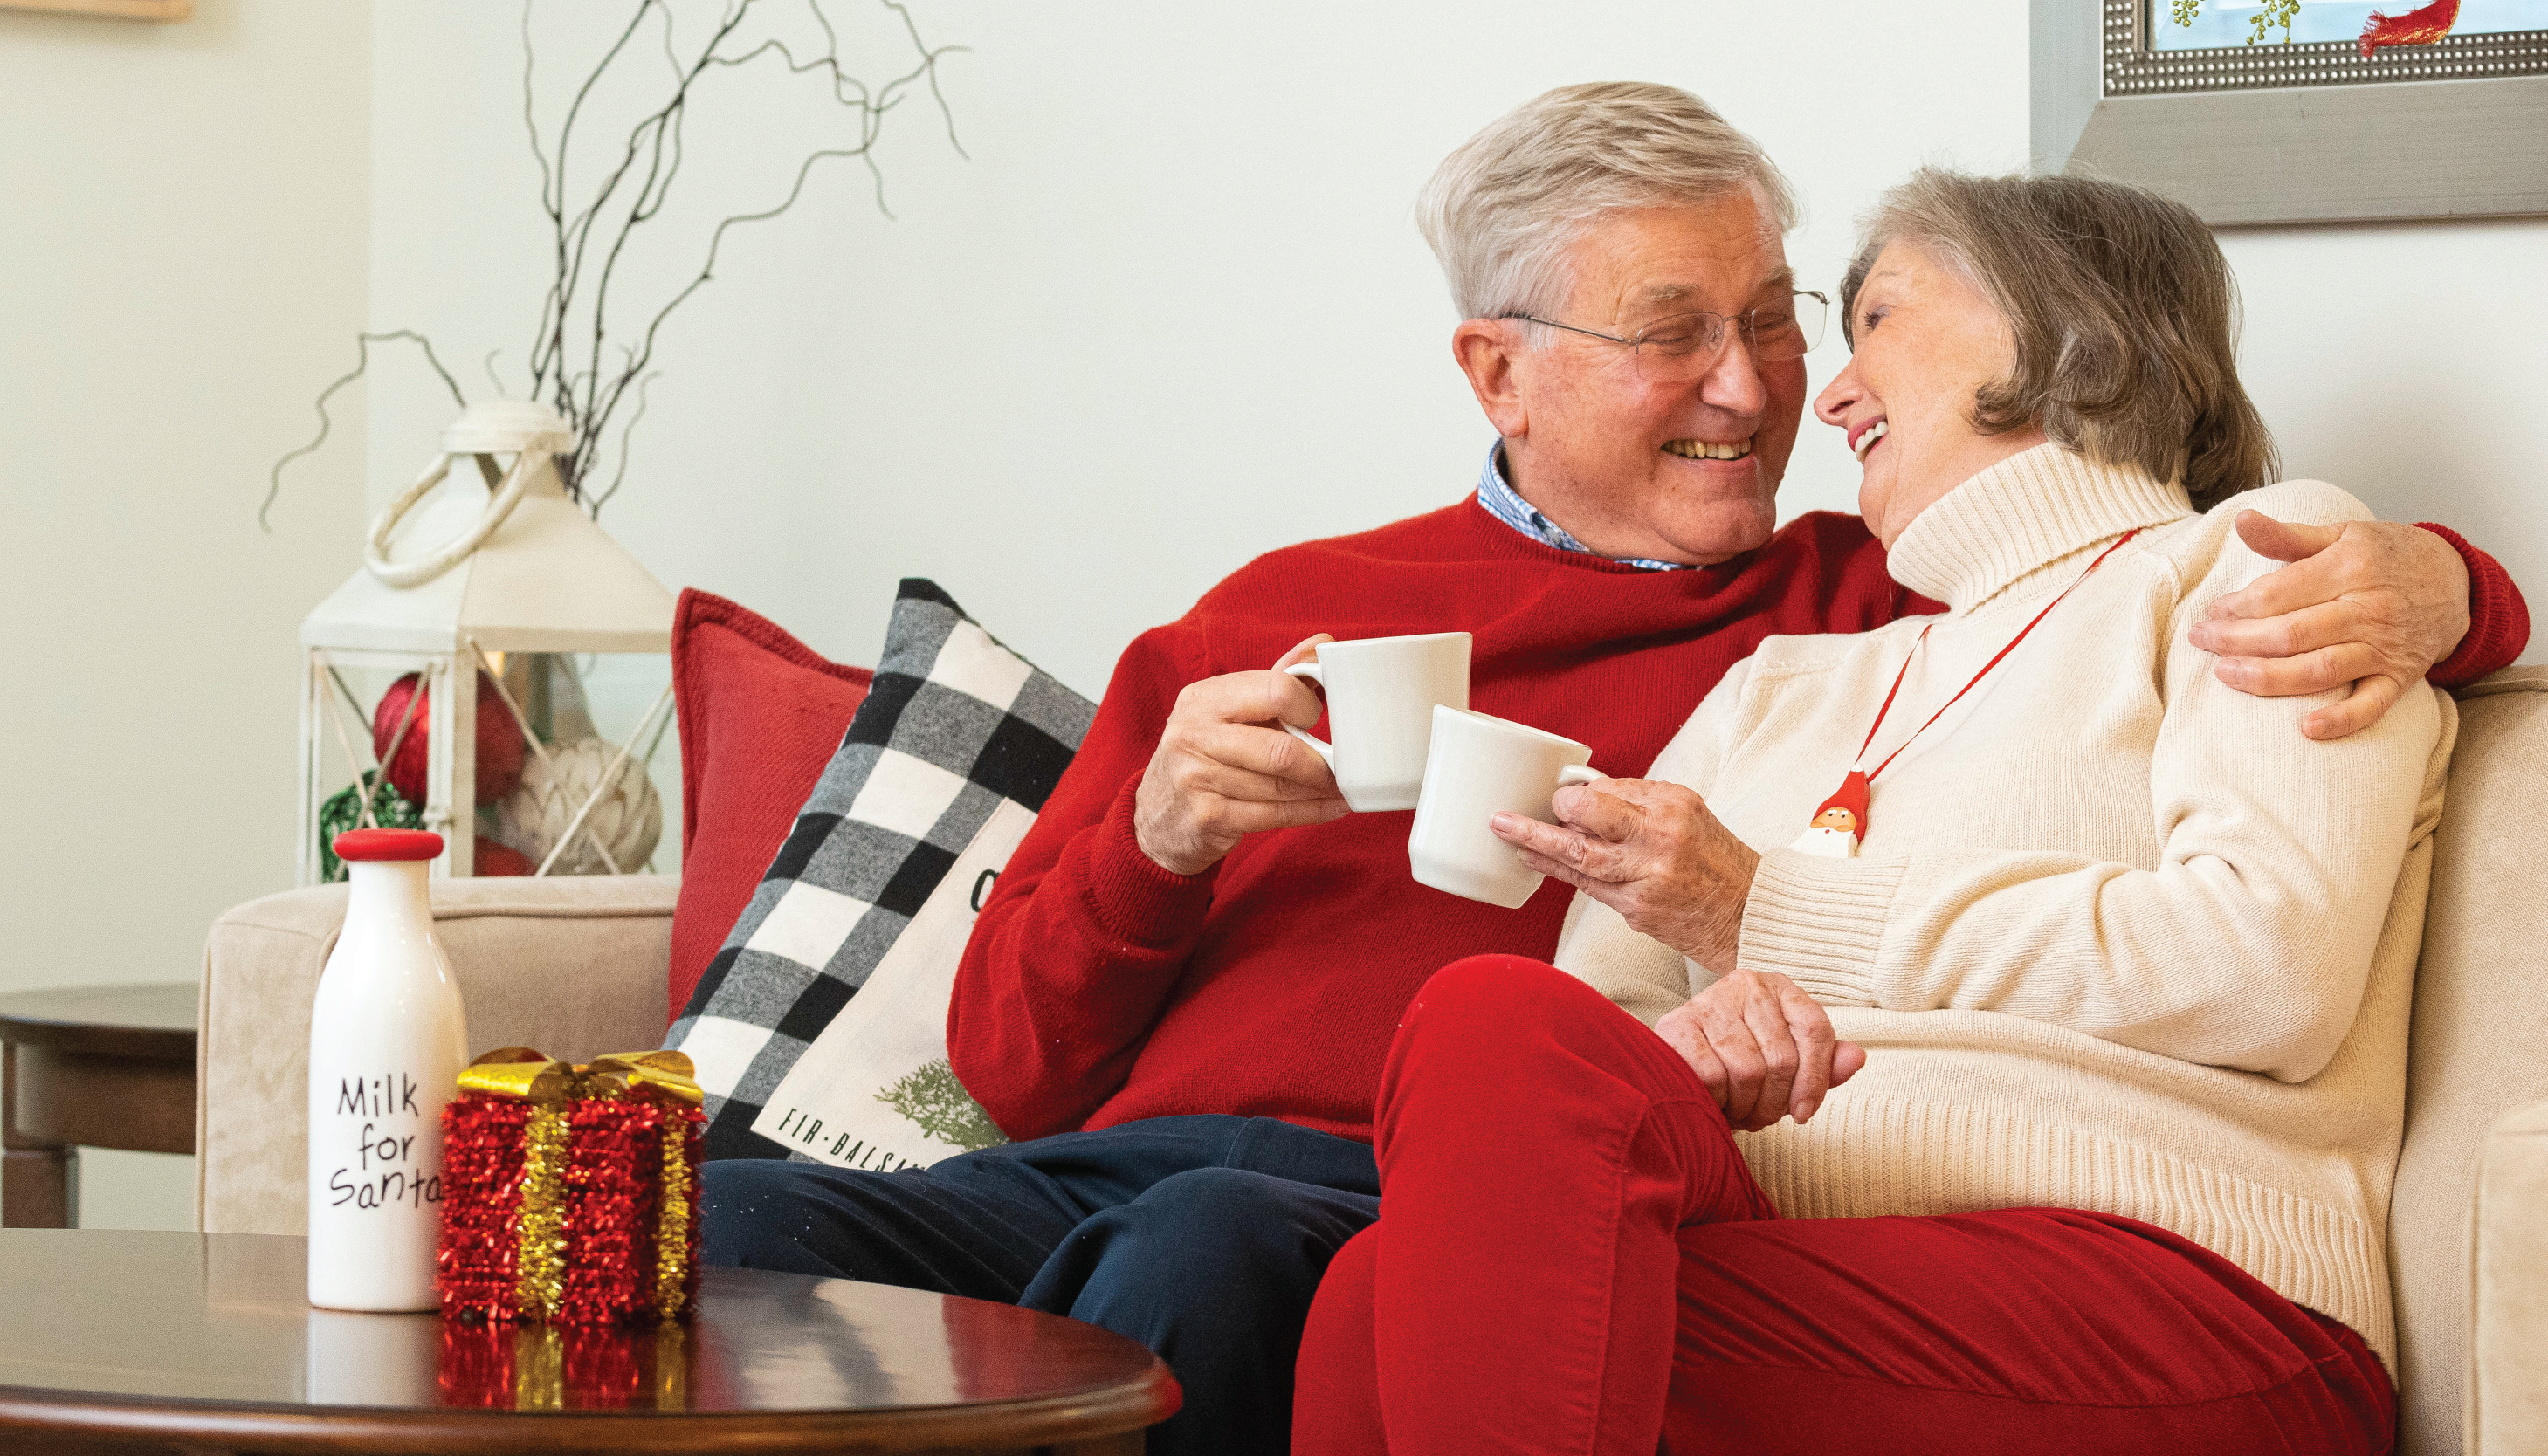 Independent living couple at Otterbein SeniorLife relax on the couch at home during winter